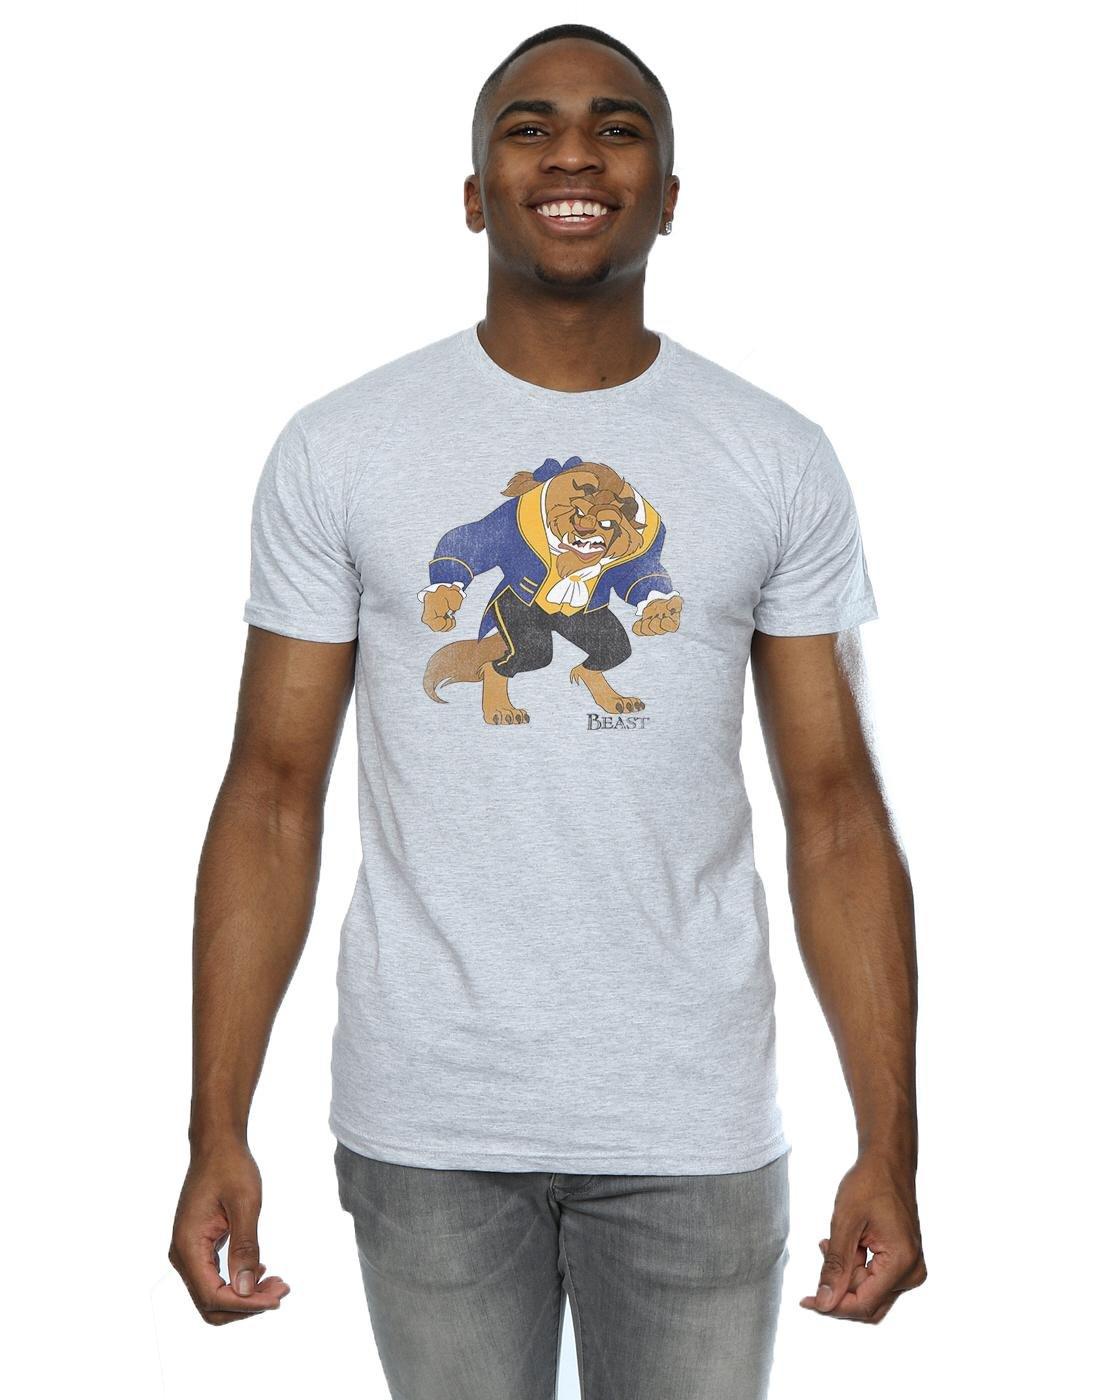 Beauty And The Beast  Tshirt 